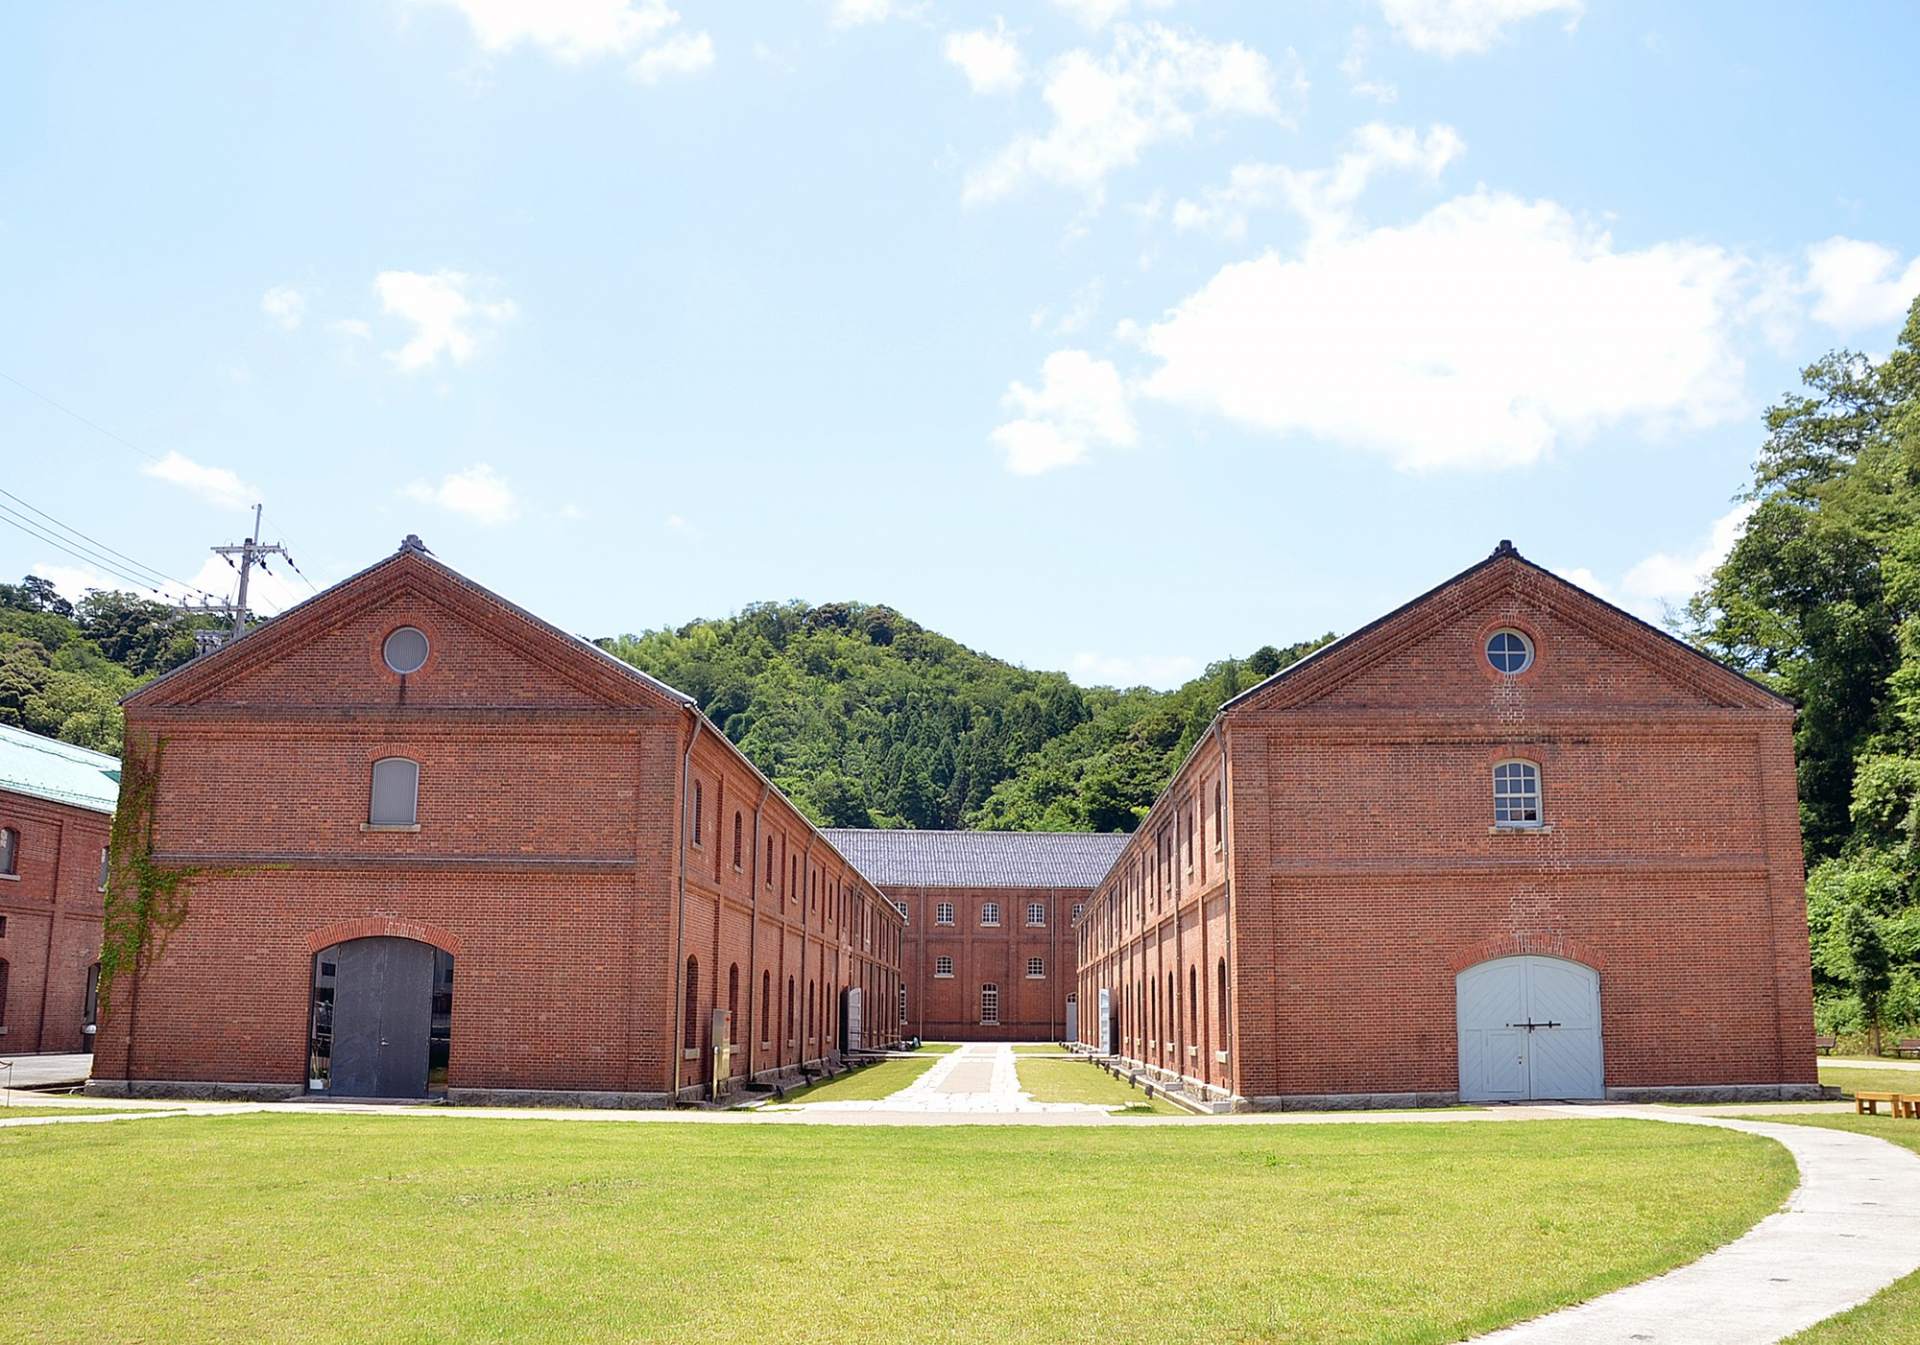 The Red Brick Park consists of five of twelve brick warehouses repurposed as a base for sightseeing in Maizuru.